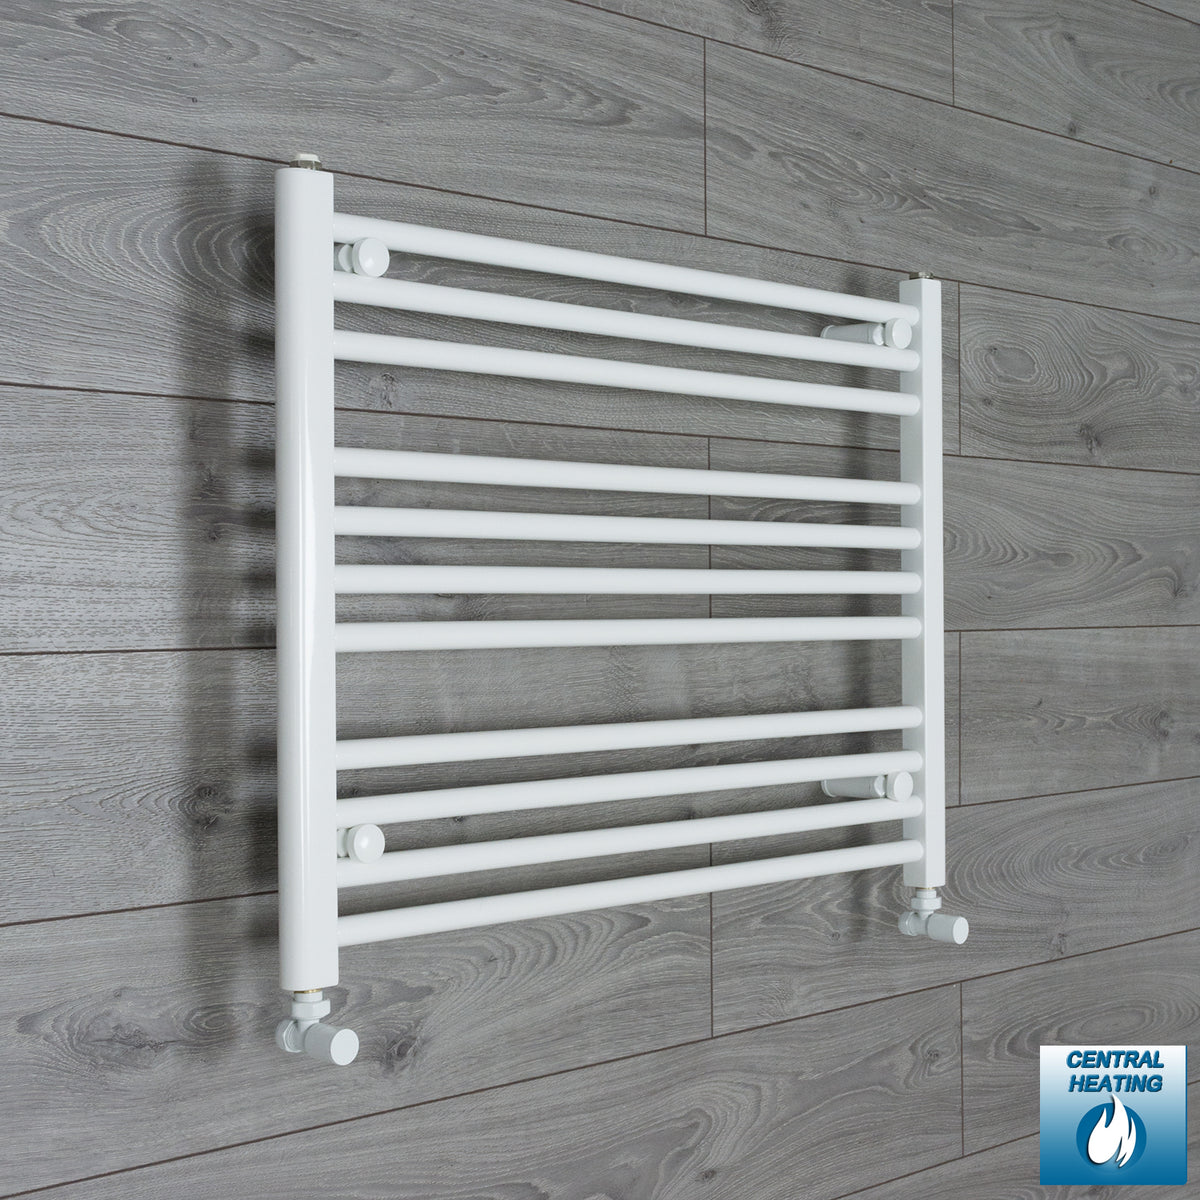 900mm Wide 600mm High White Towel Rail Radiator With Angled Valve